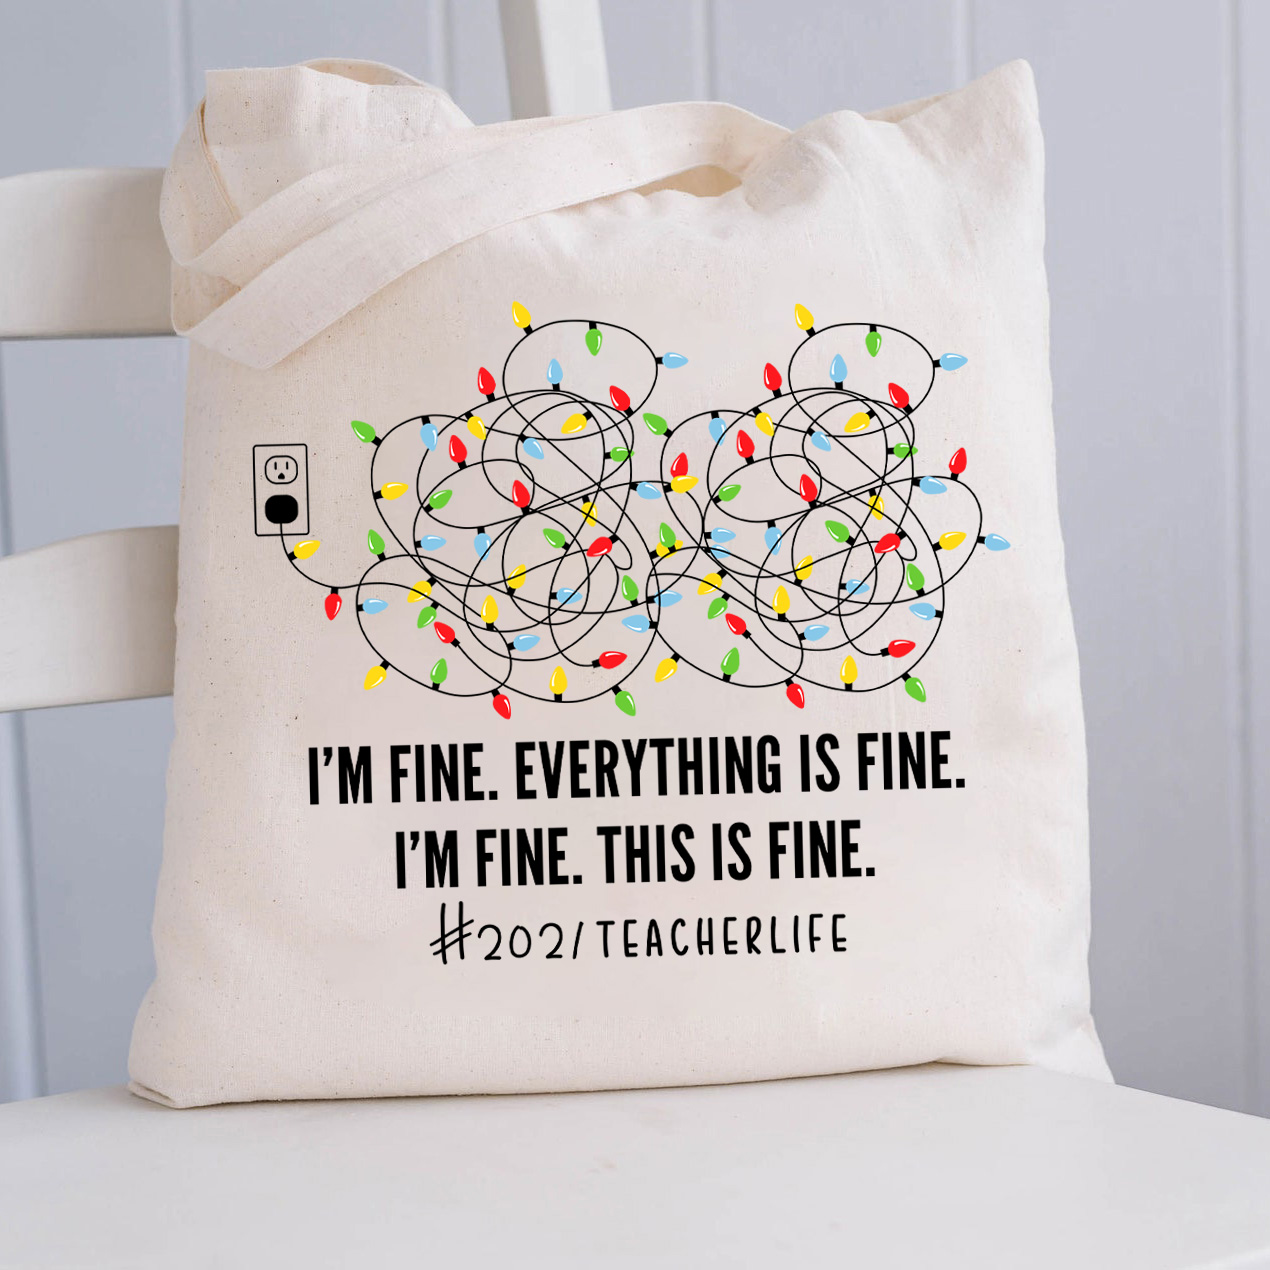 Everythings Is Fine Tote Bag